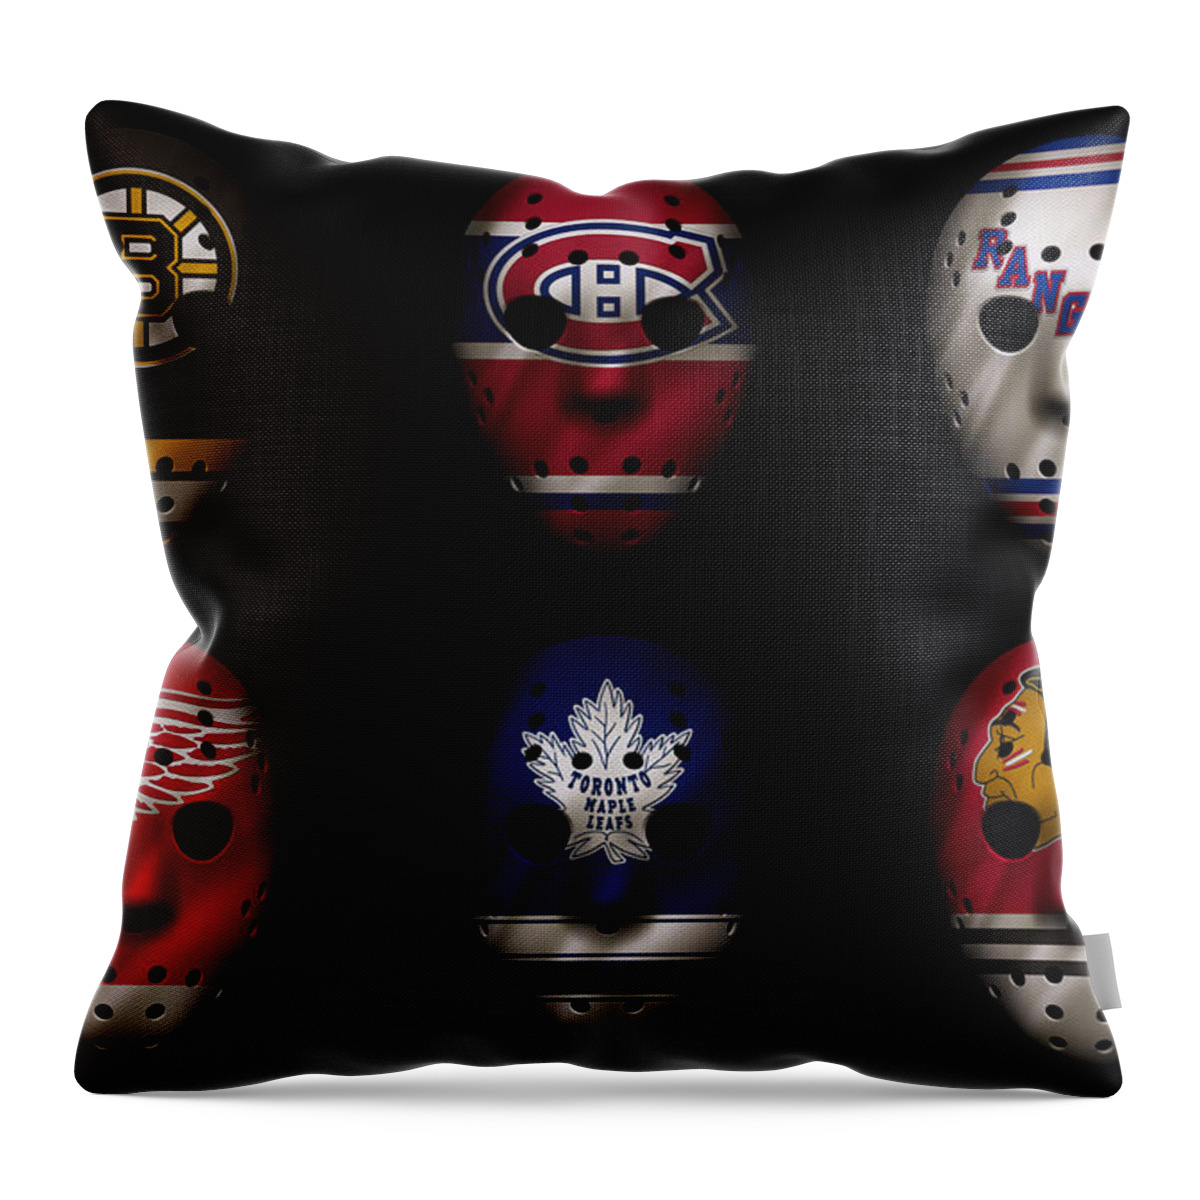 Detroit Red Wings Throw Pillow featuring the photograph Original Six Jersey Mask by Joe Hamilton